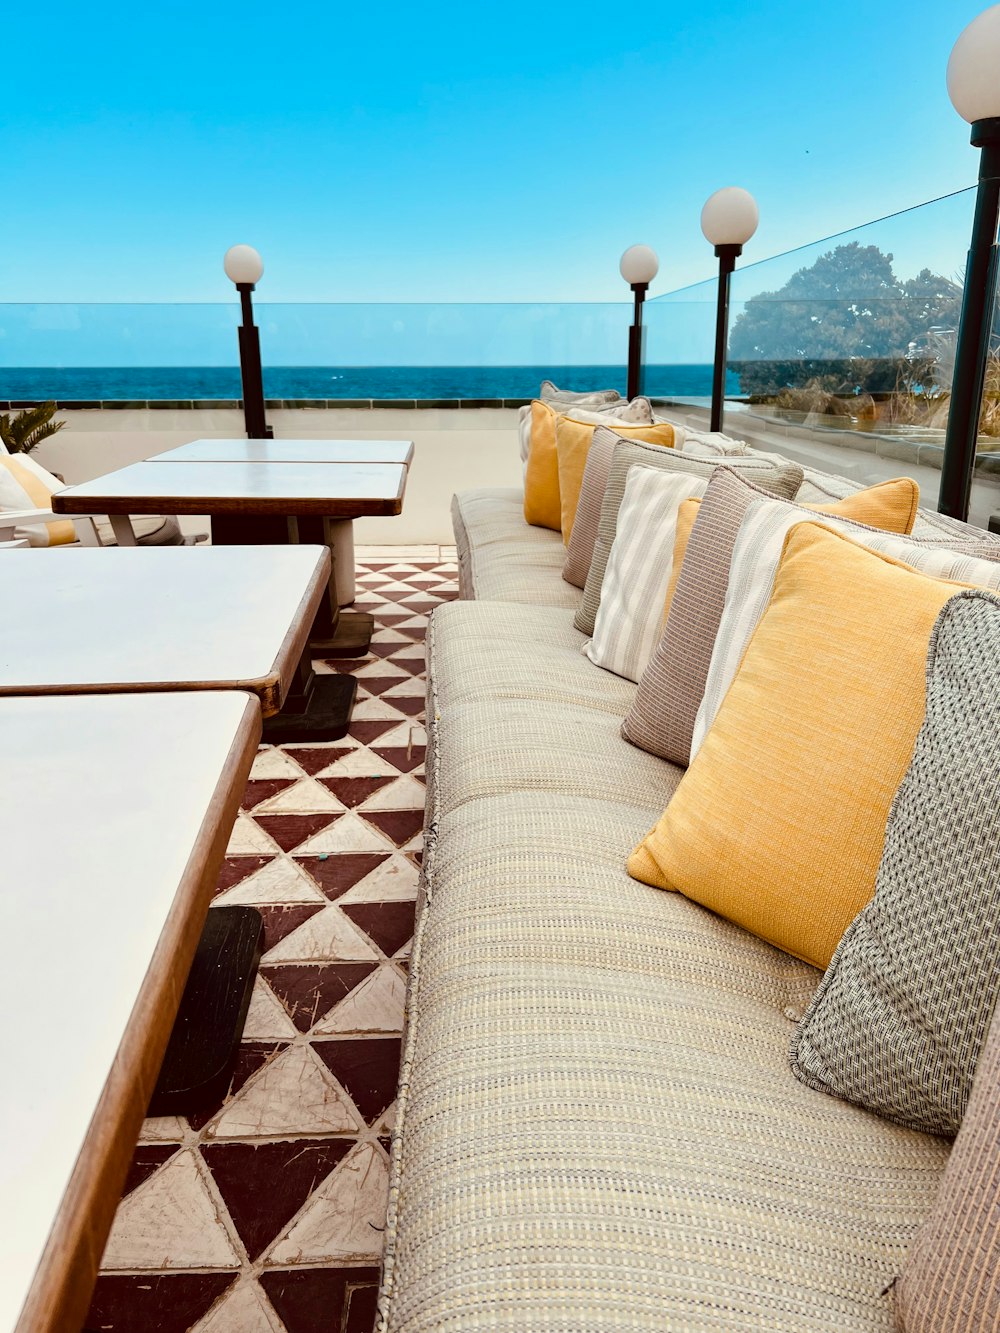 a couch and tables on a patio overlooking the ocean